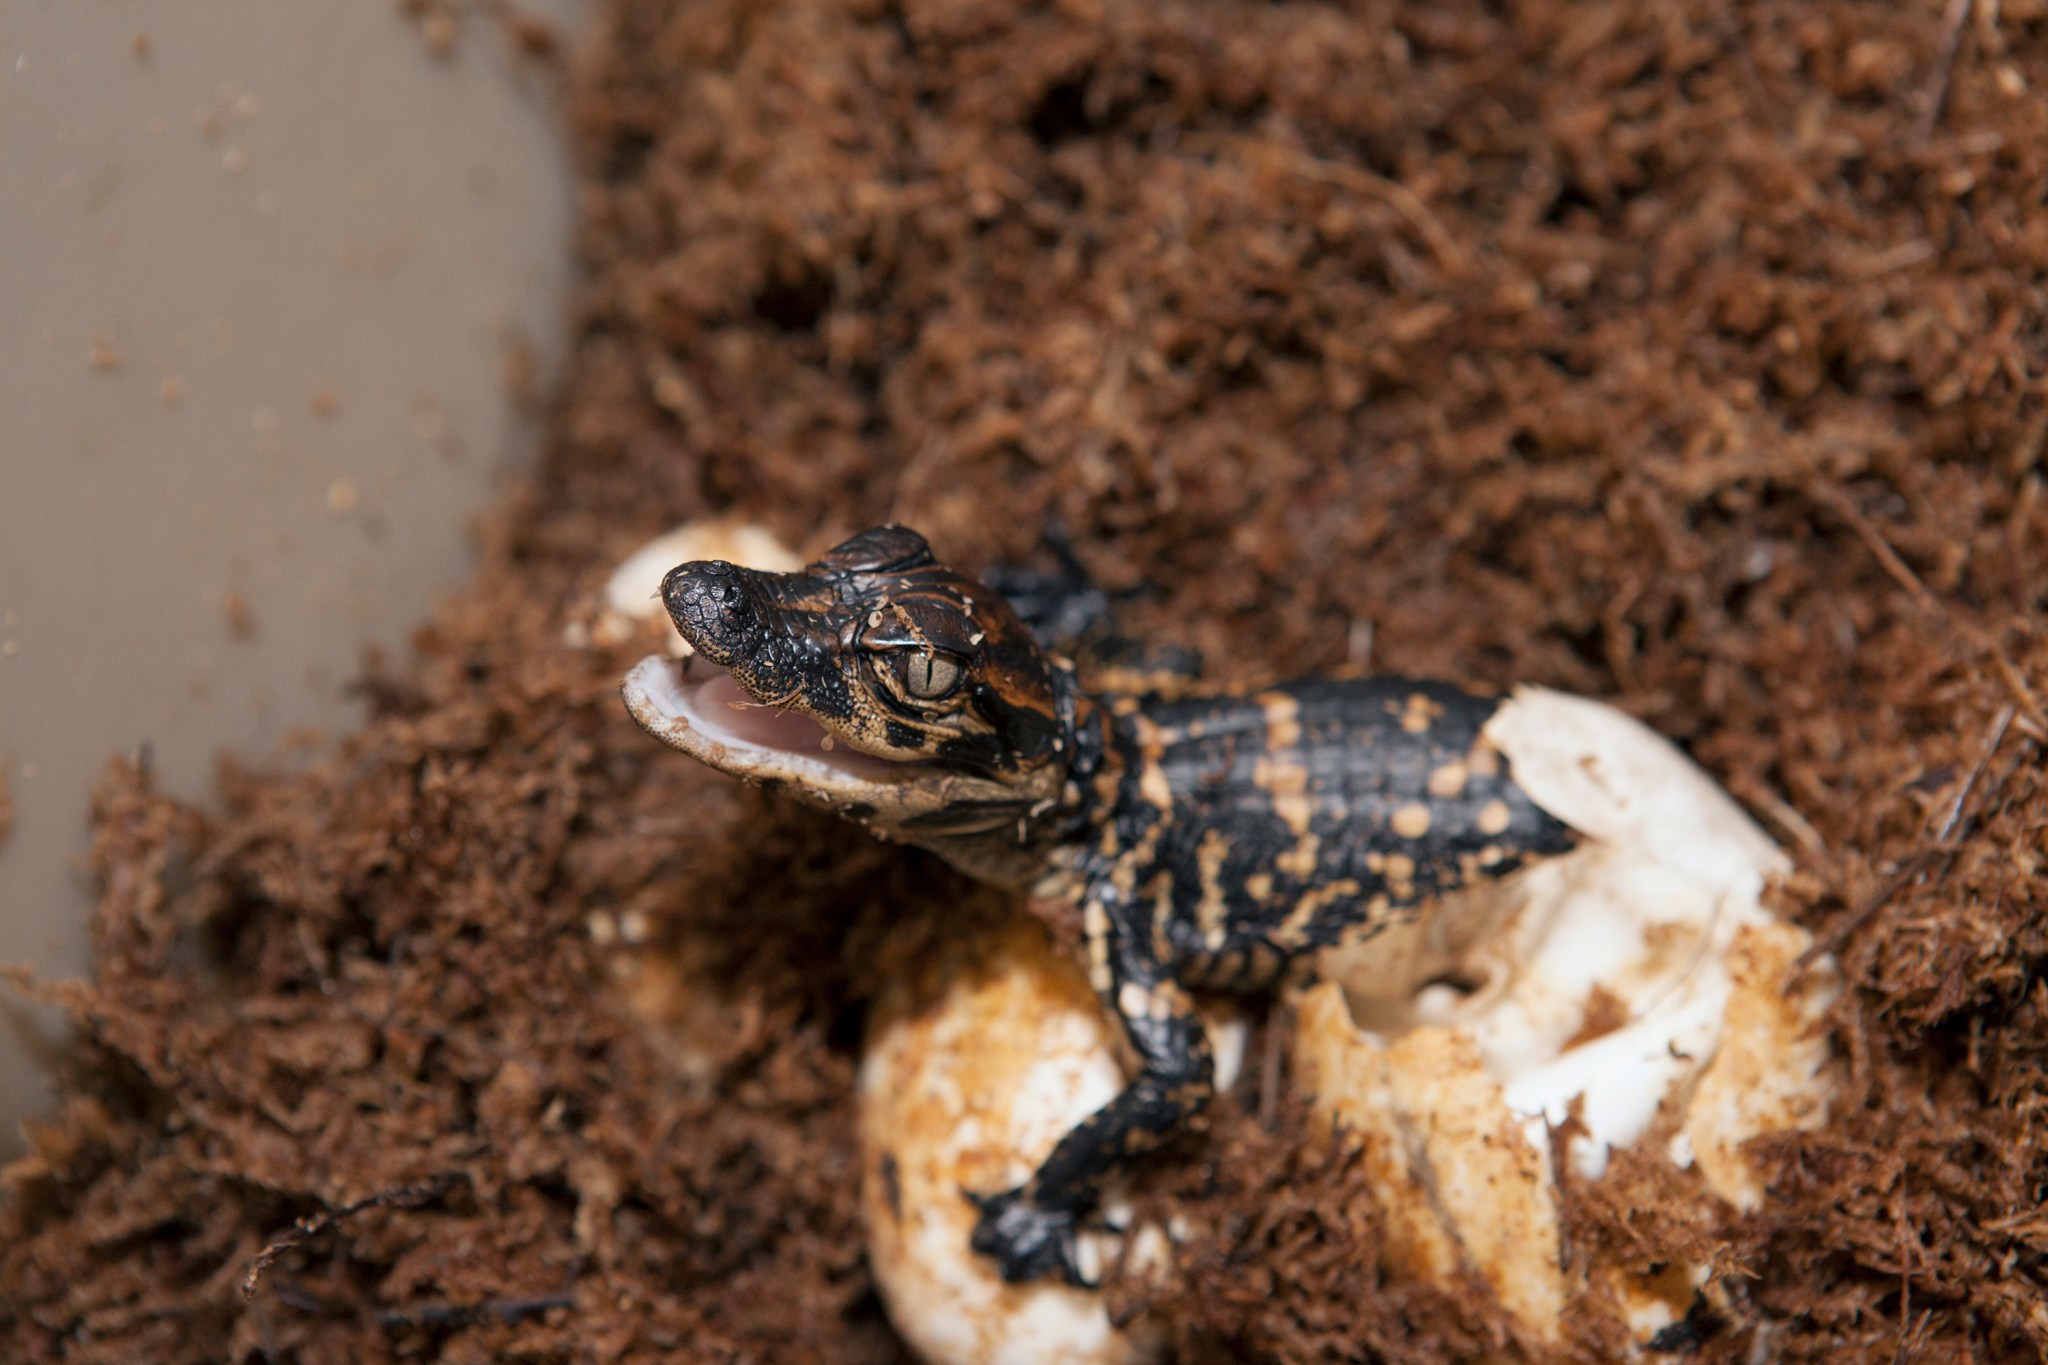 A newly hatched alligator rests inside a nesting container filled with sphagnum moss.